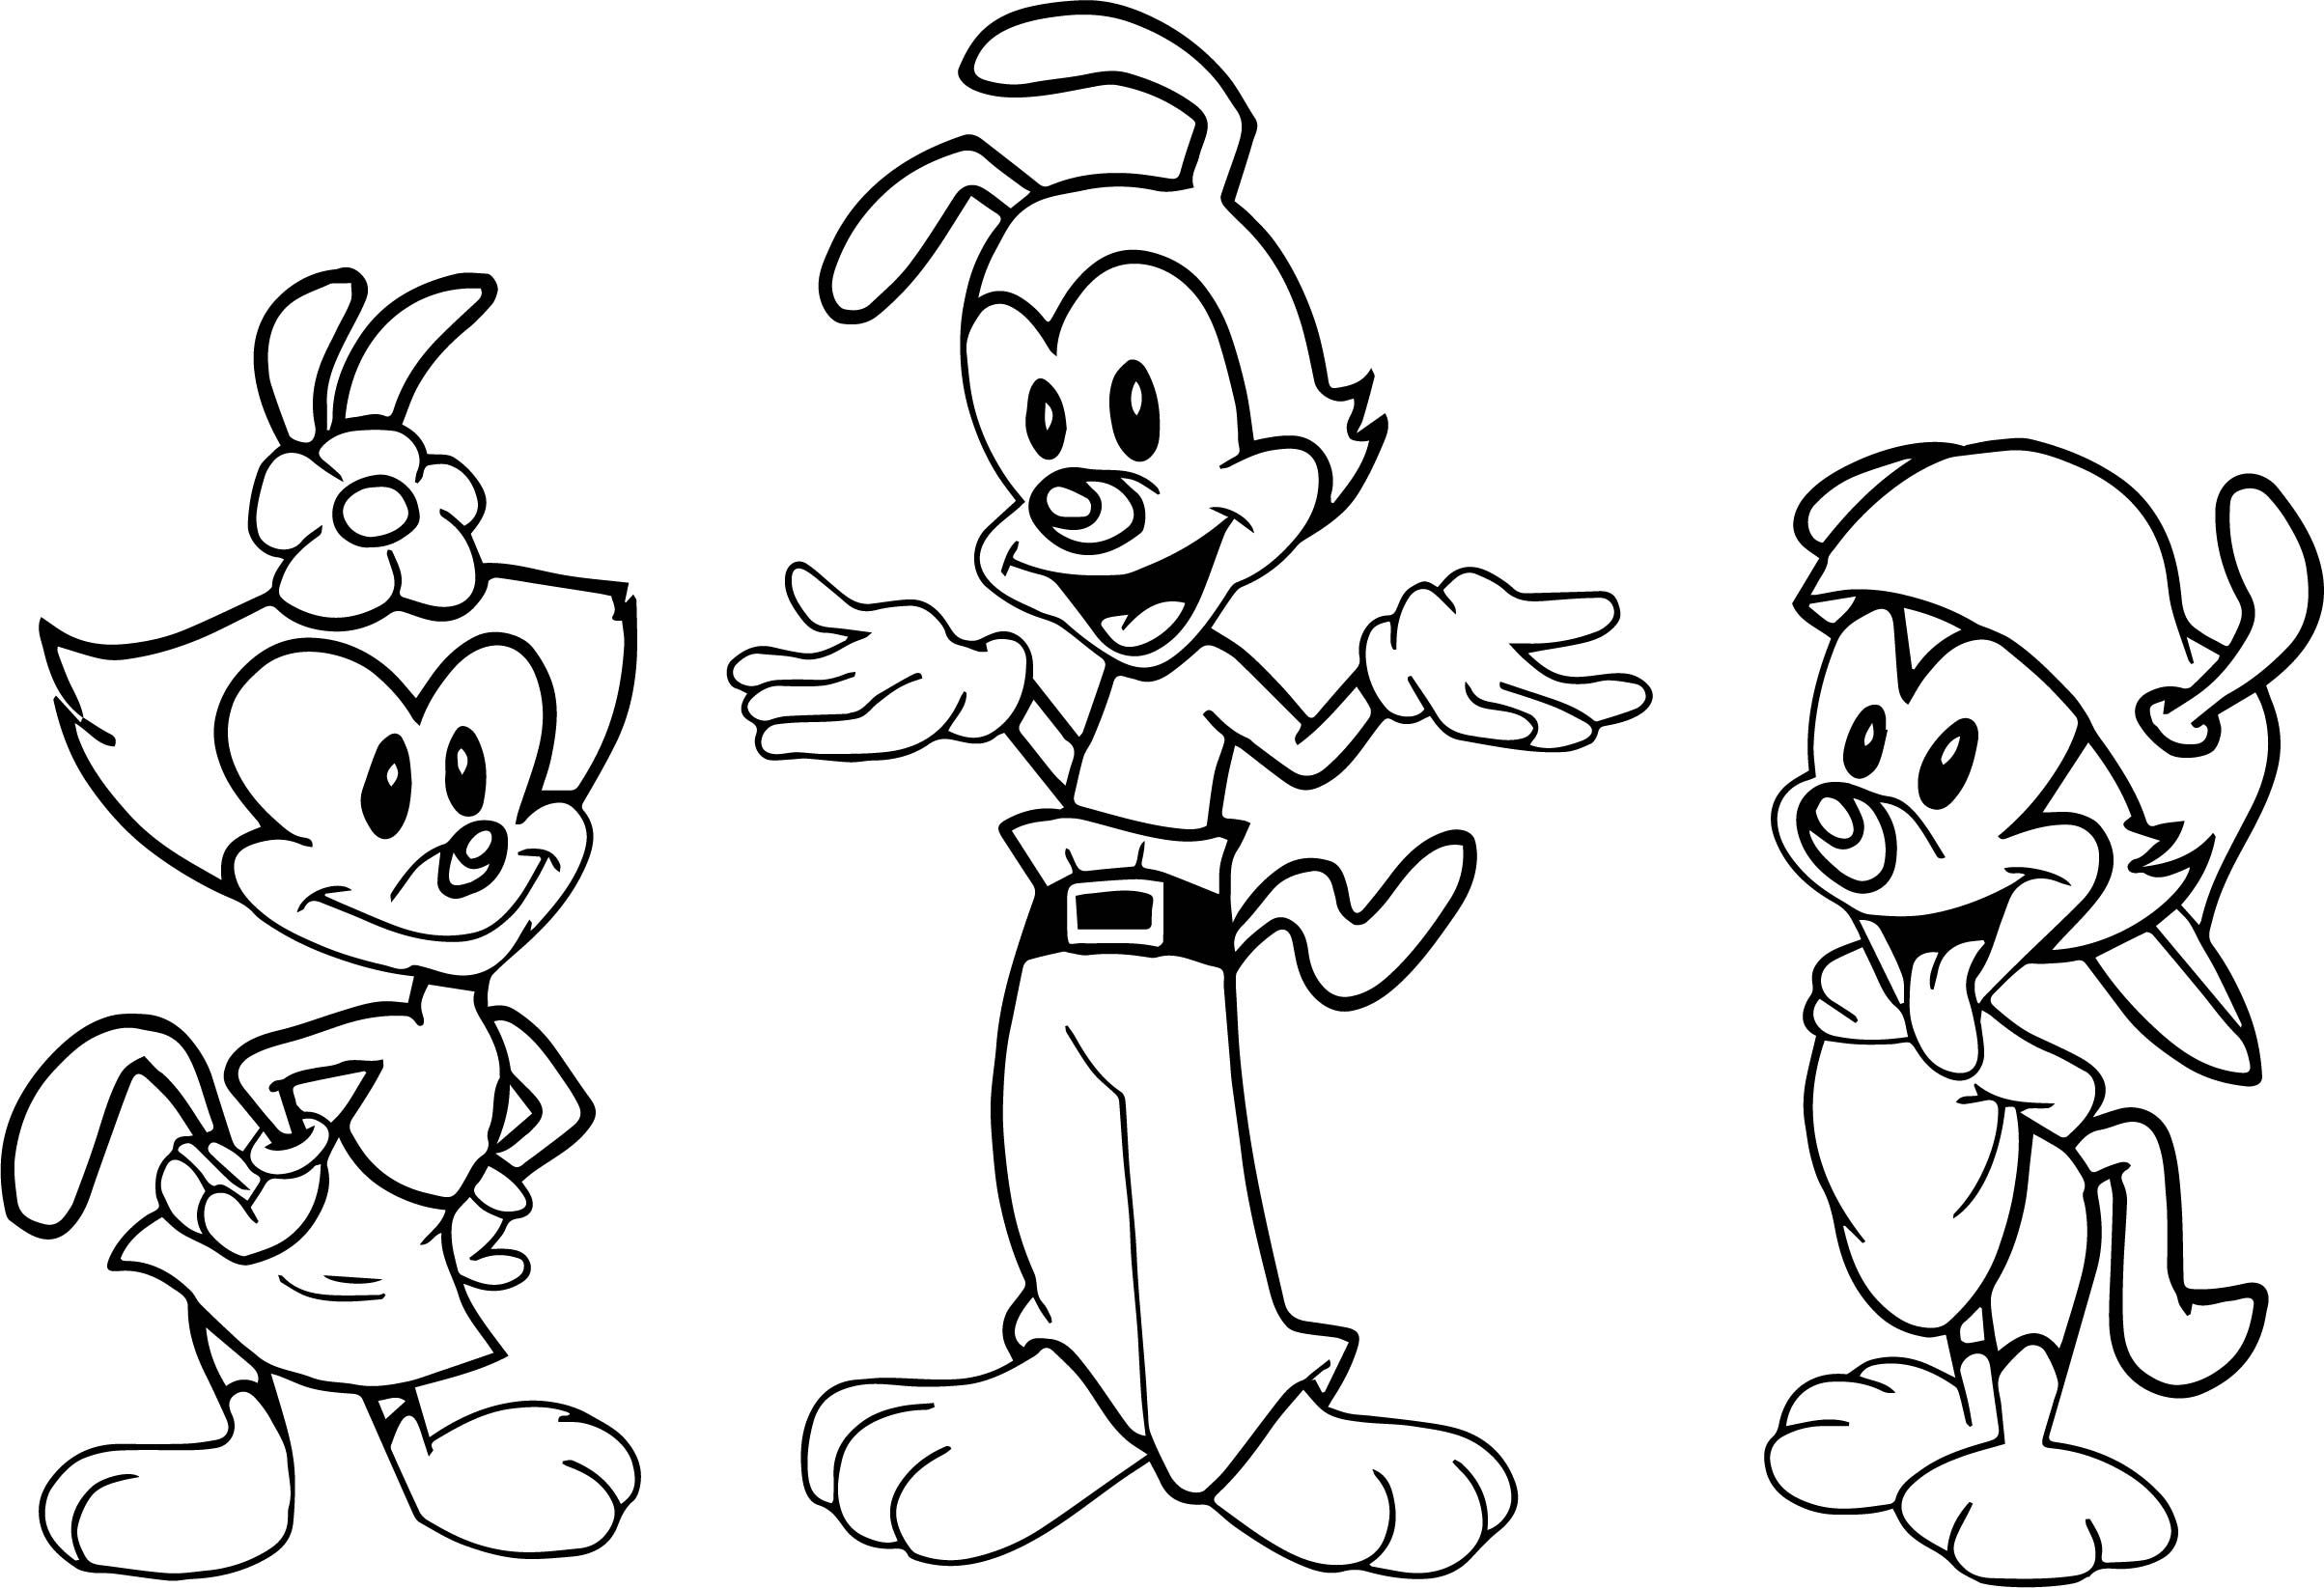 Printable Animaniacs Coloring Pages Pdf For Kids - Printable Animaniacs Coloring Pages